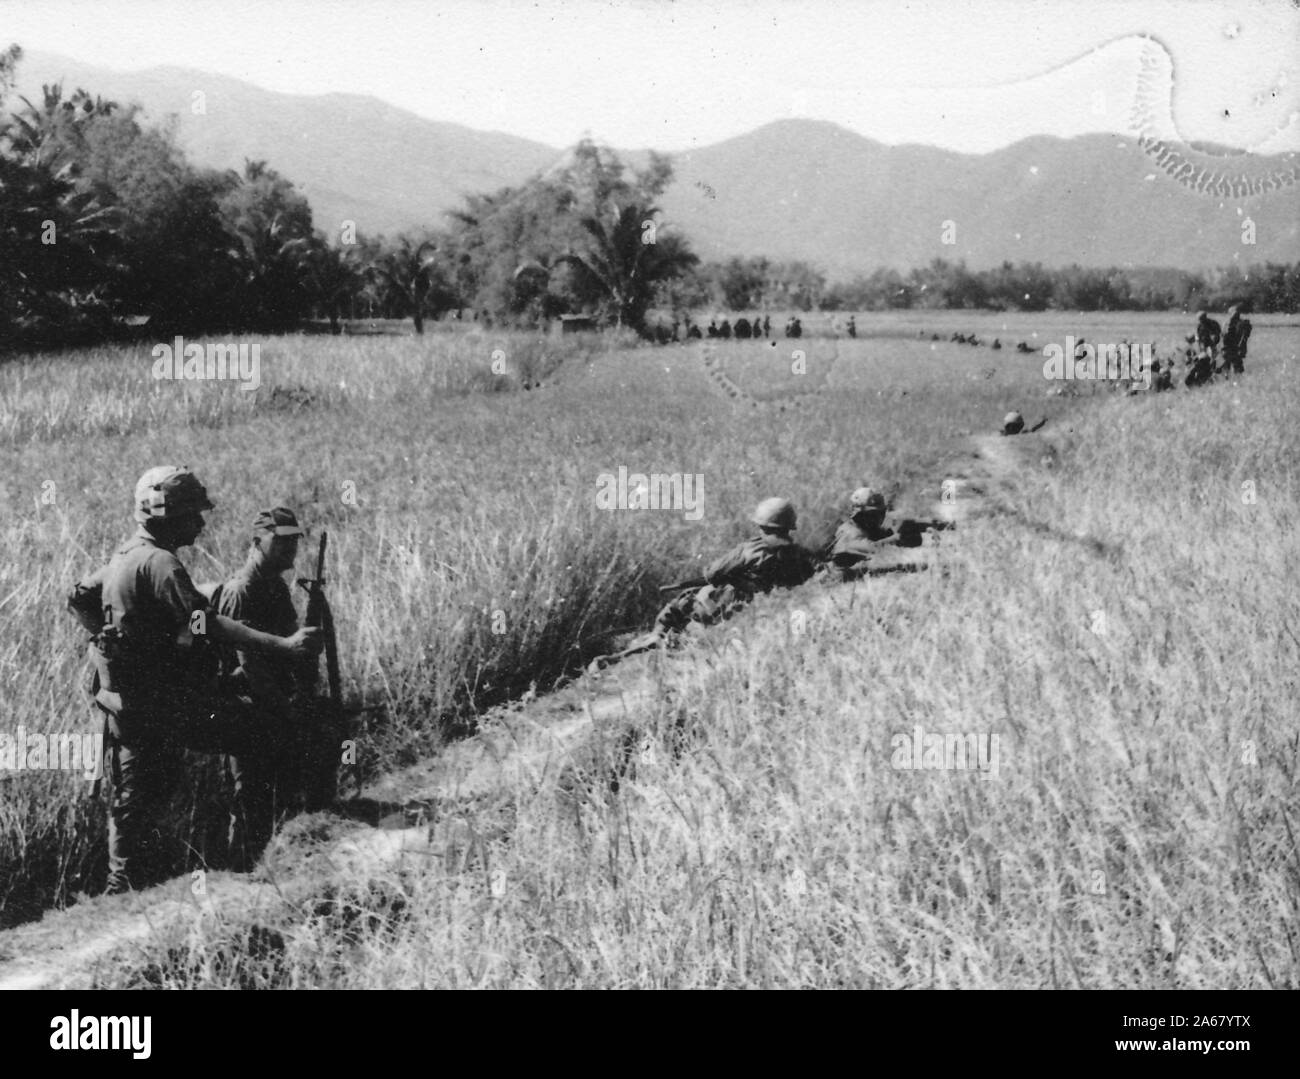 Long shot of armed American servicemen, outside on a sunny day, standing and crouching on a curved path leading through a field with tall grasses or rice plants, Vietnam, 1965. () Stock Photo